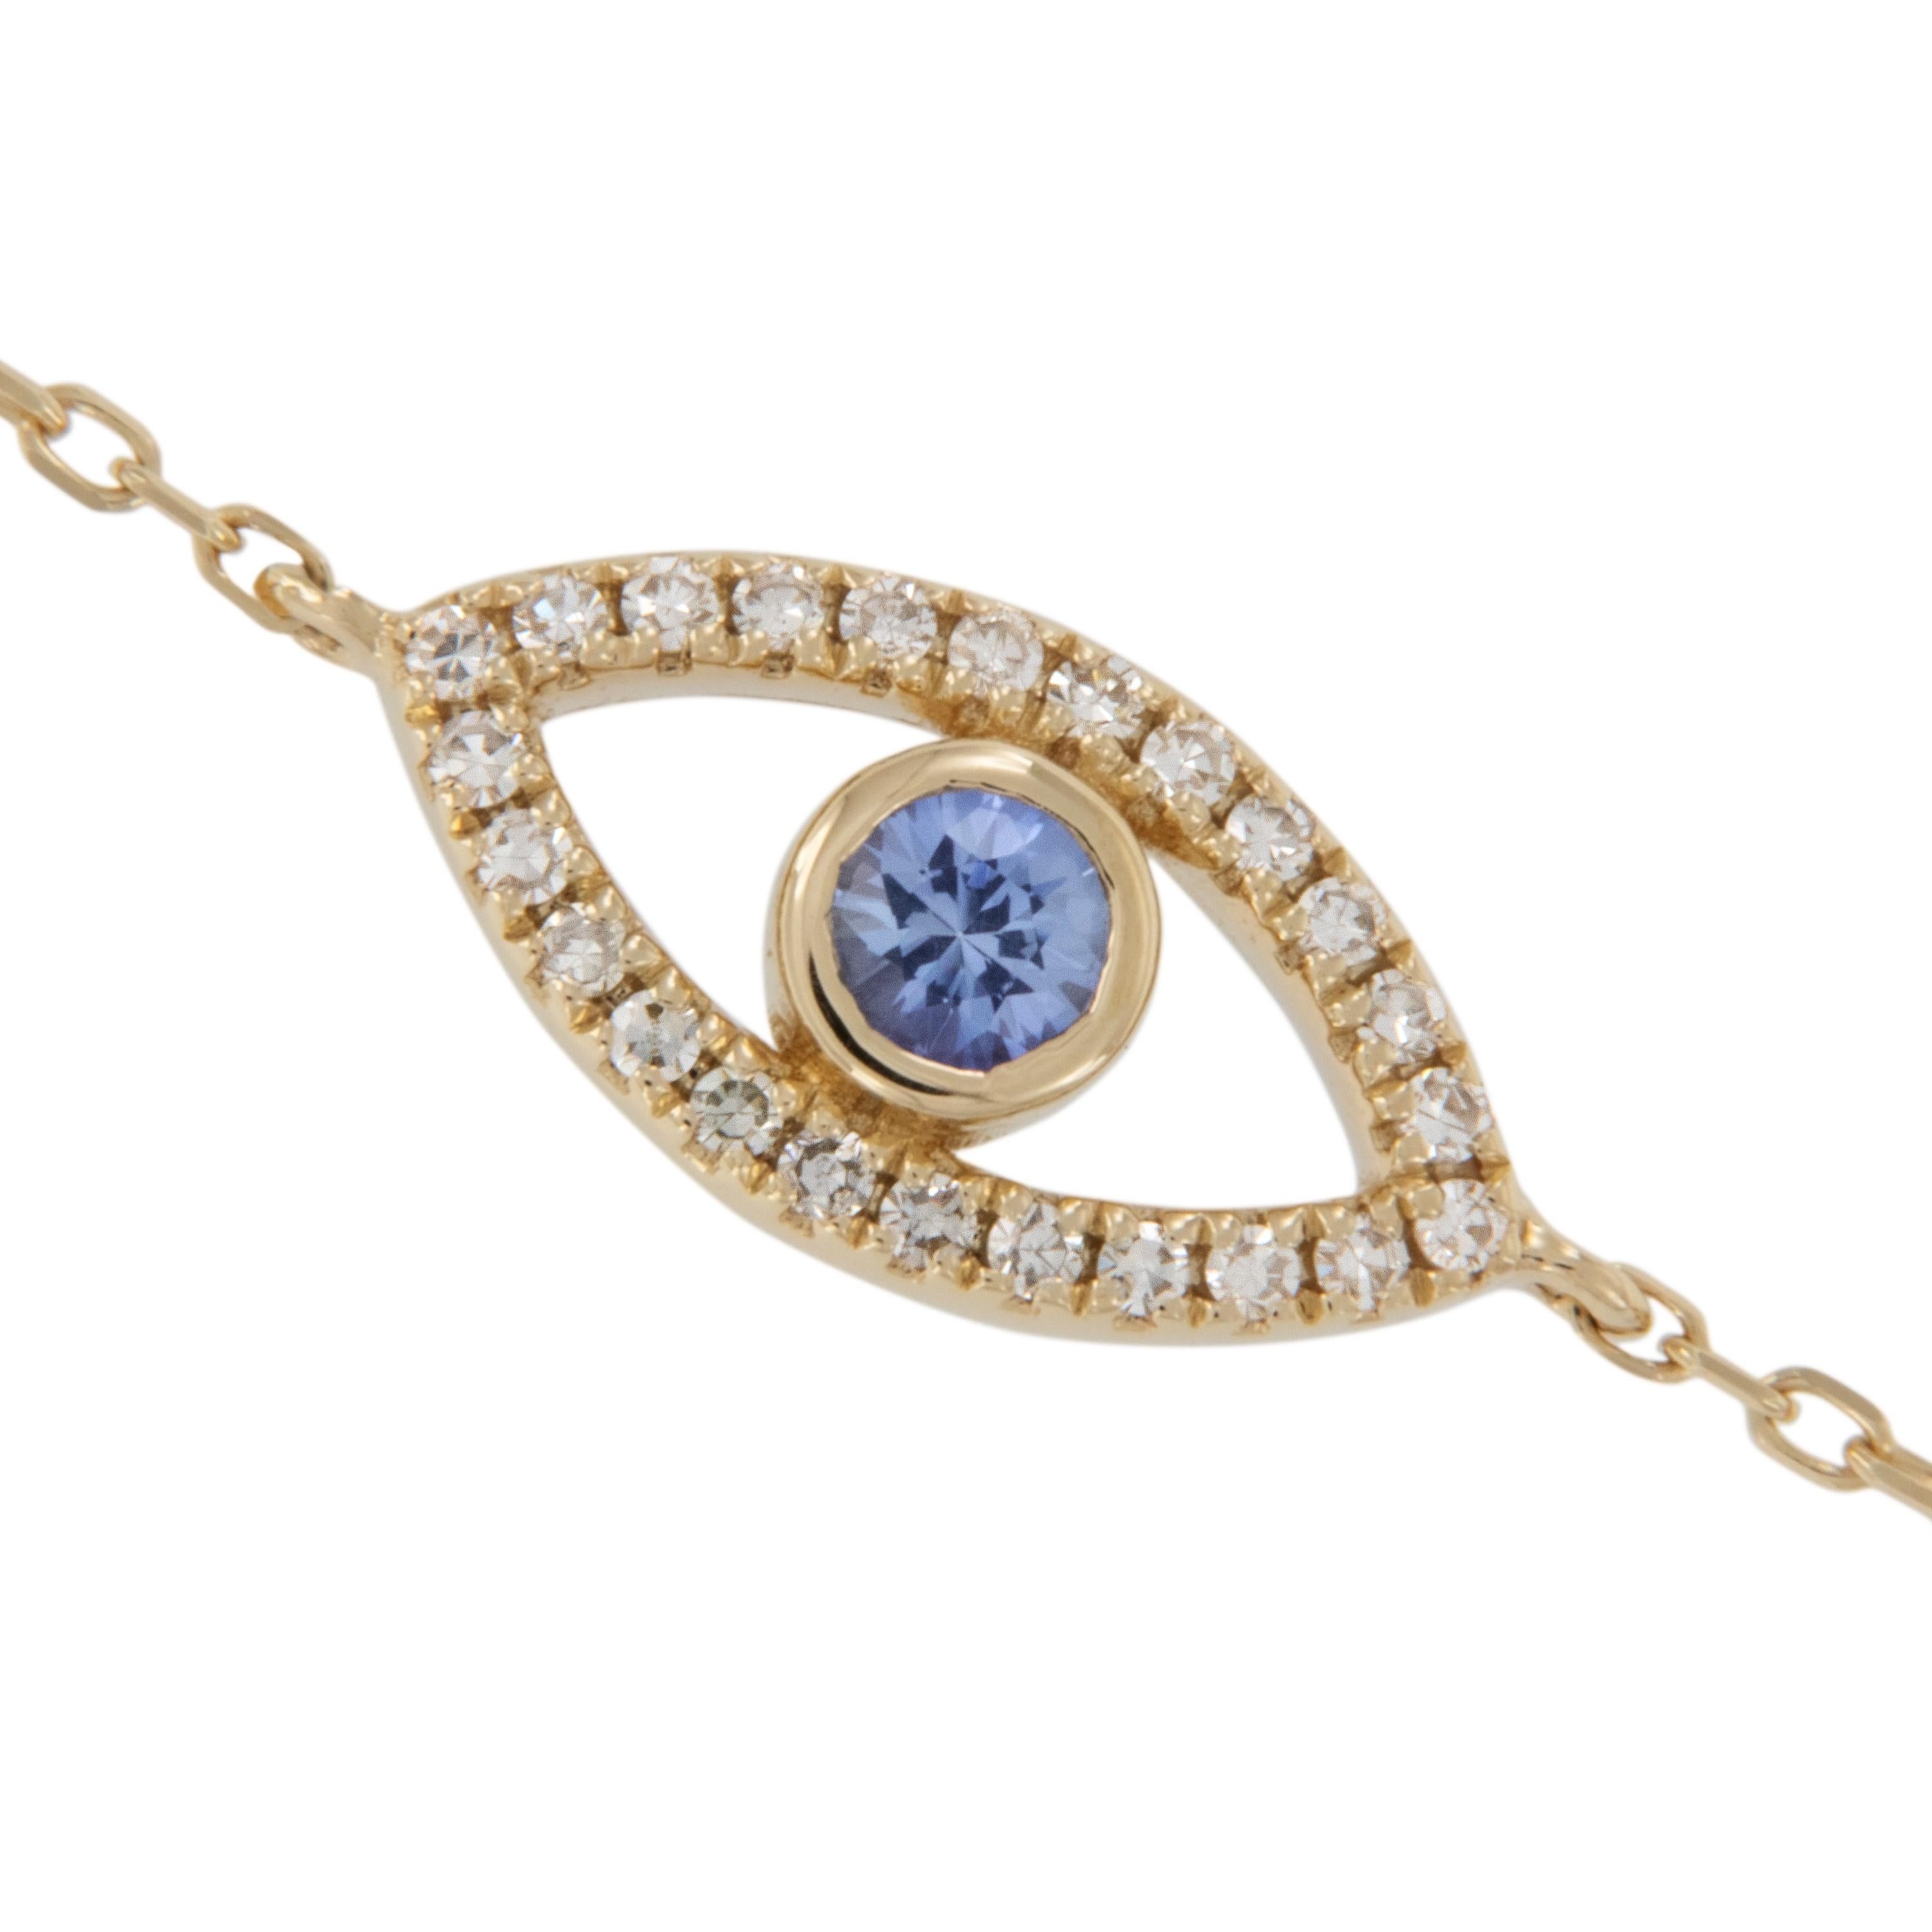 Sapphire as blue as the summer sky is the iris for this evil eye talisman which is thought to keep you safe from curses. Blue is the traditional color for good karma, positive energies, and protection against the evil eye. Looks great on your wrist